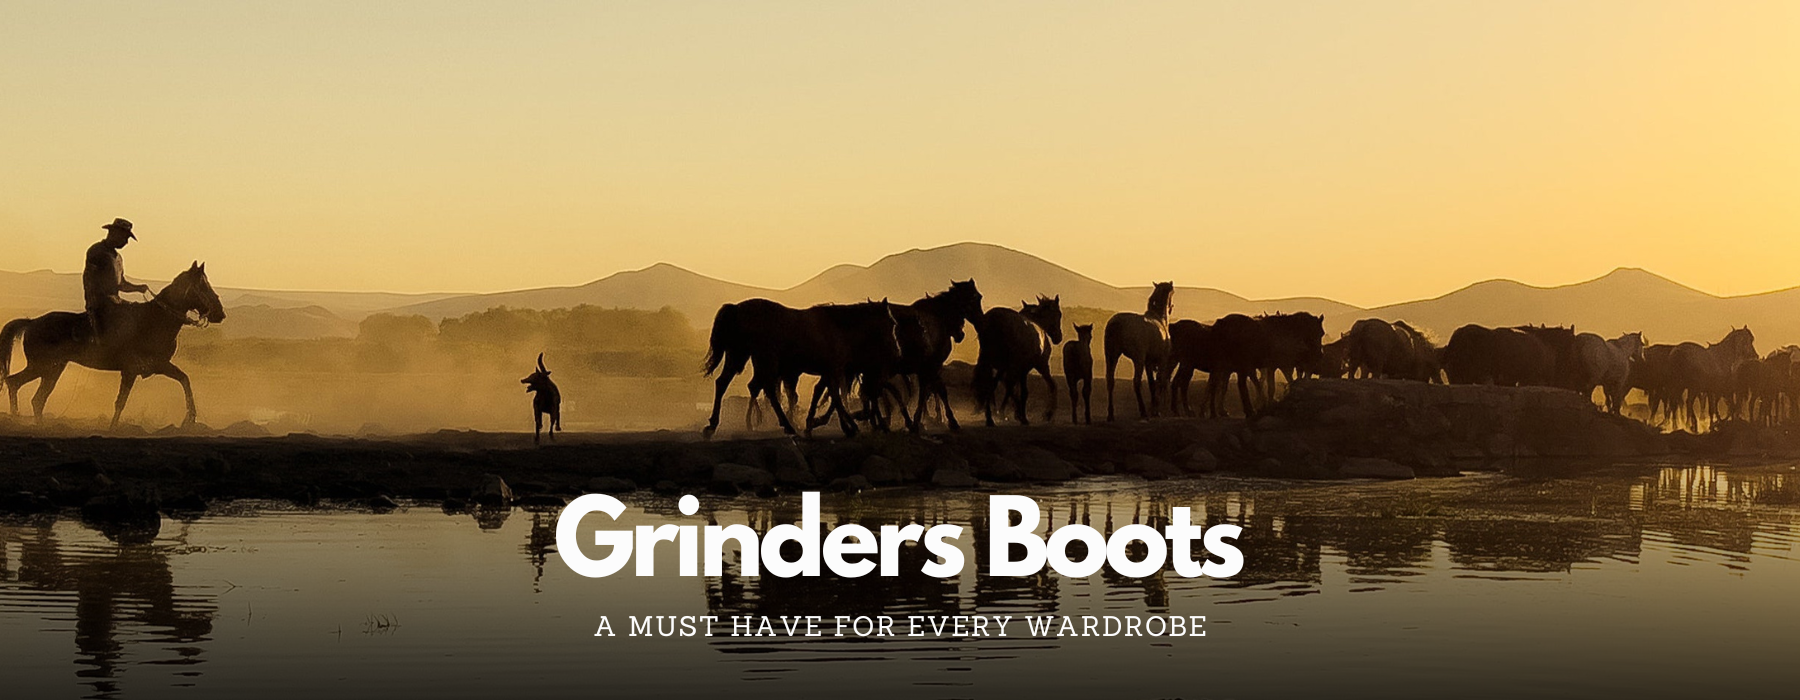 Why Grinders Boots Are a Must-Have for Every Wardrobe in the UK